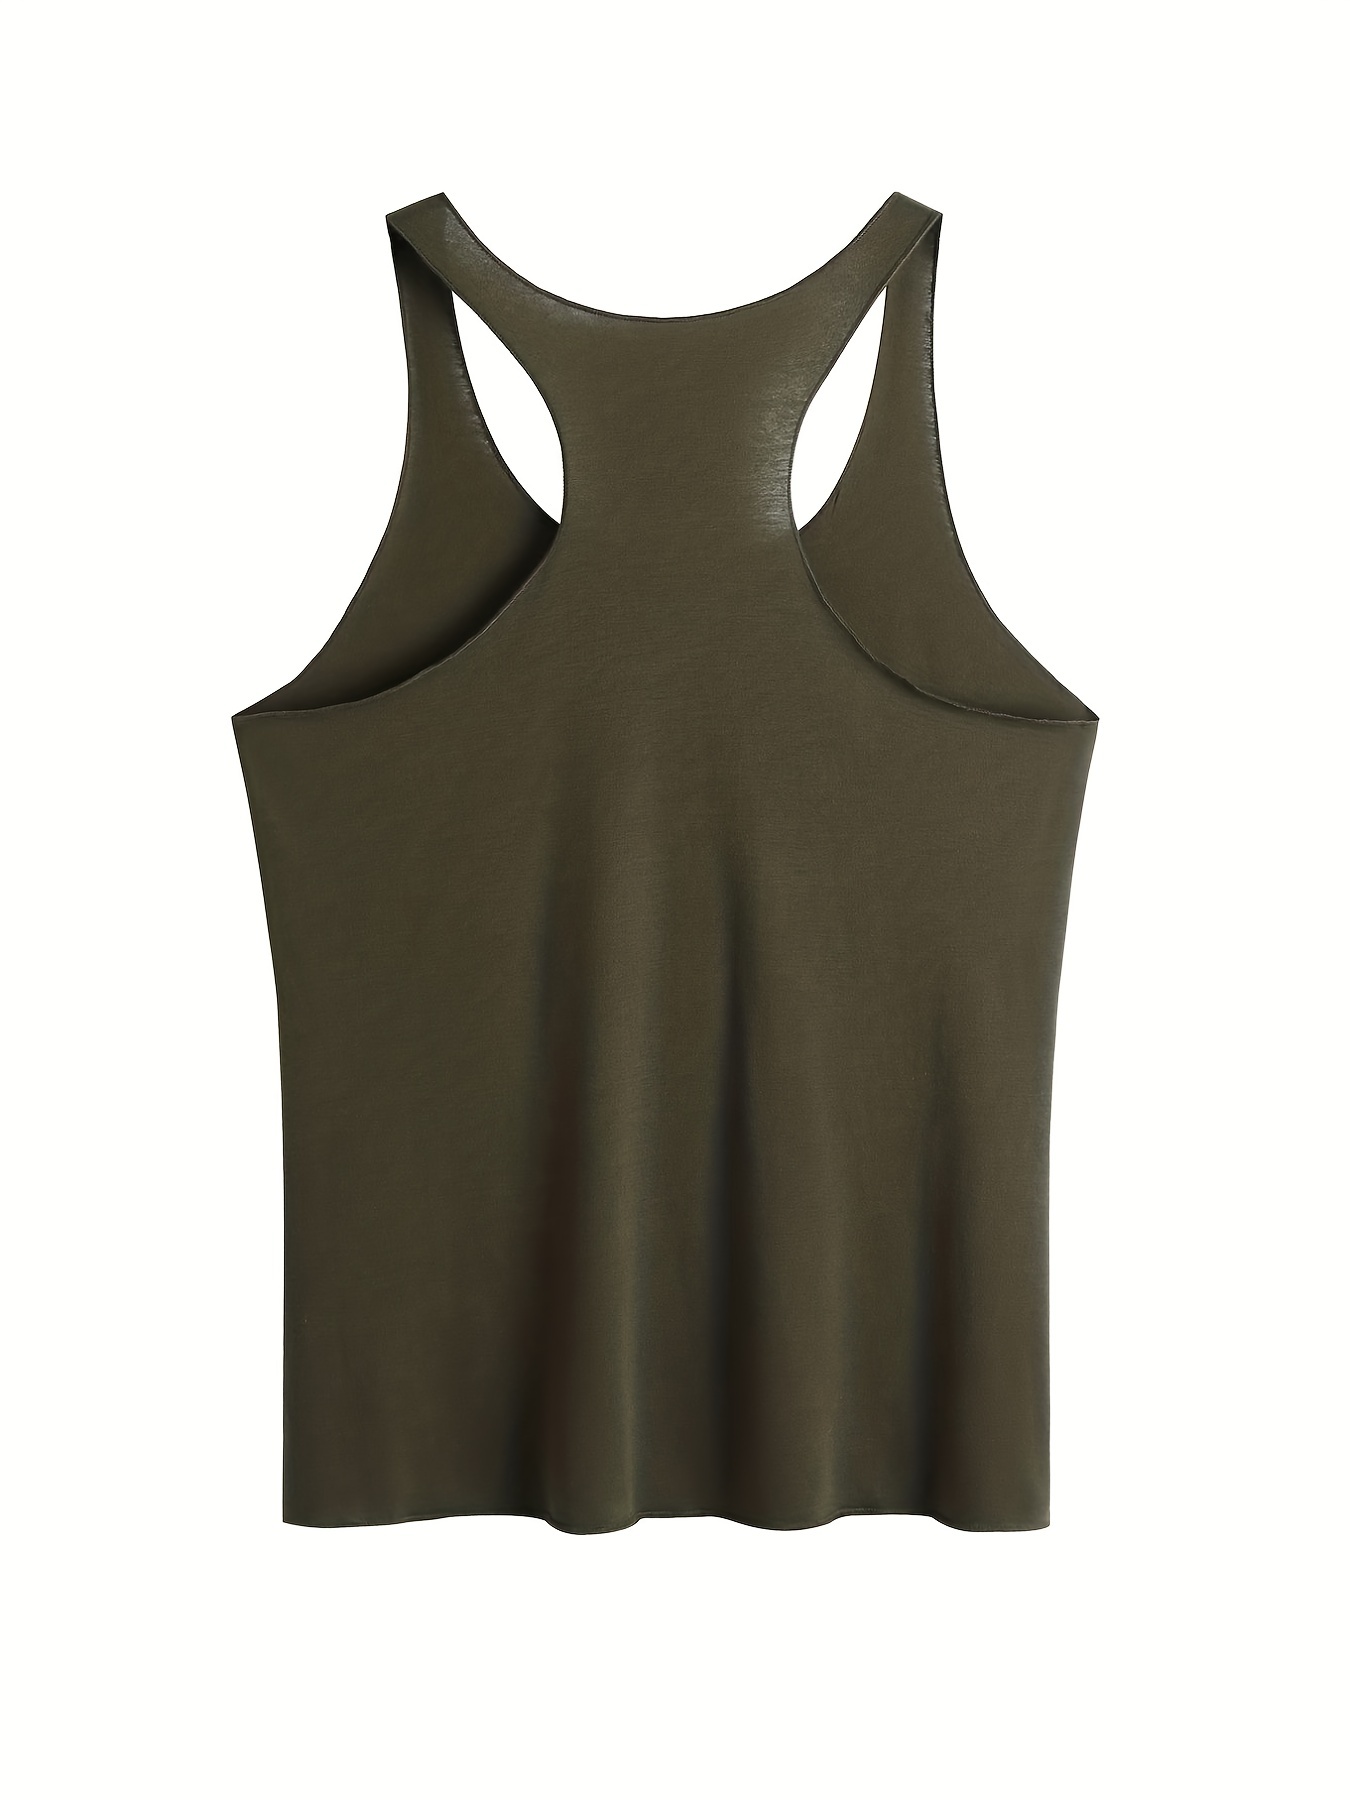 All in Motion Tank Top Womens Olive Green Racerback Activewear Size (M)